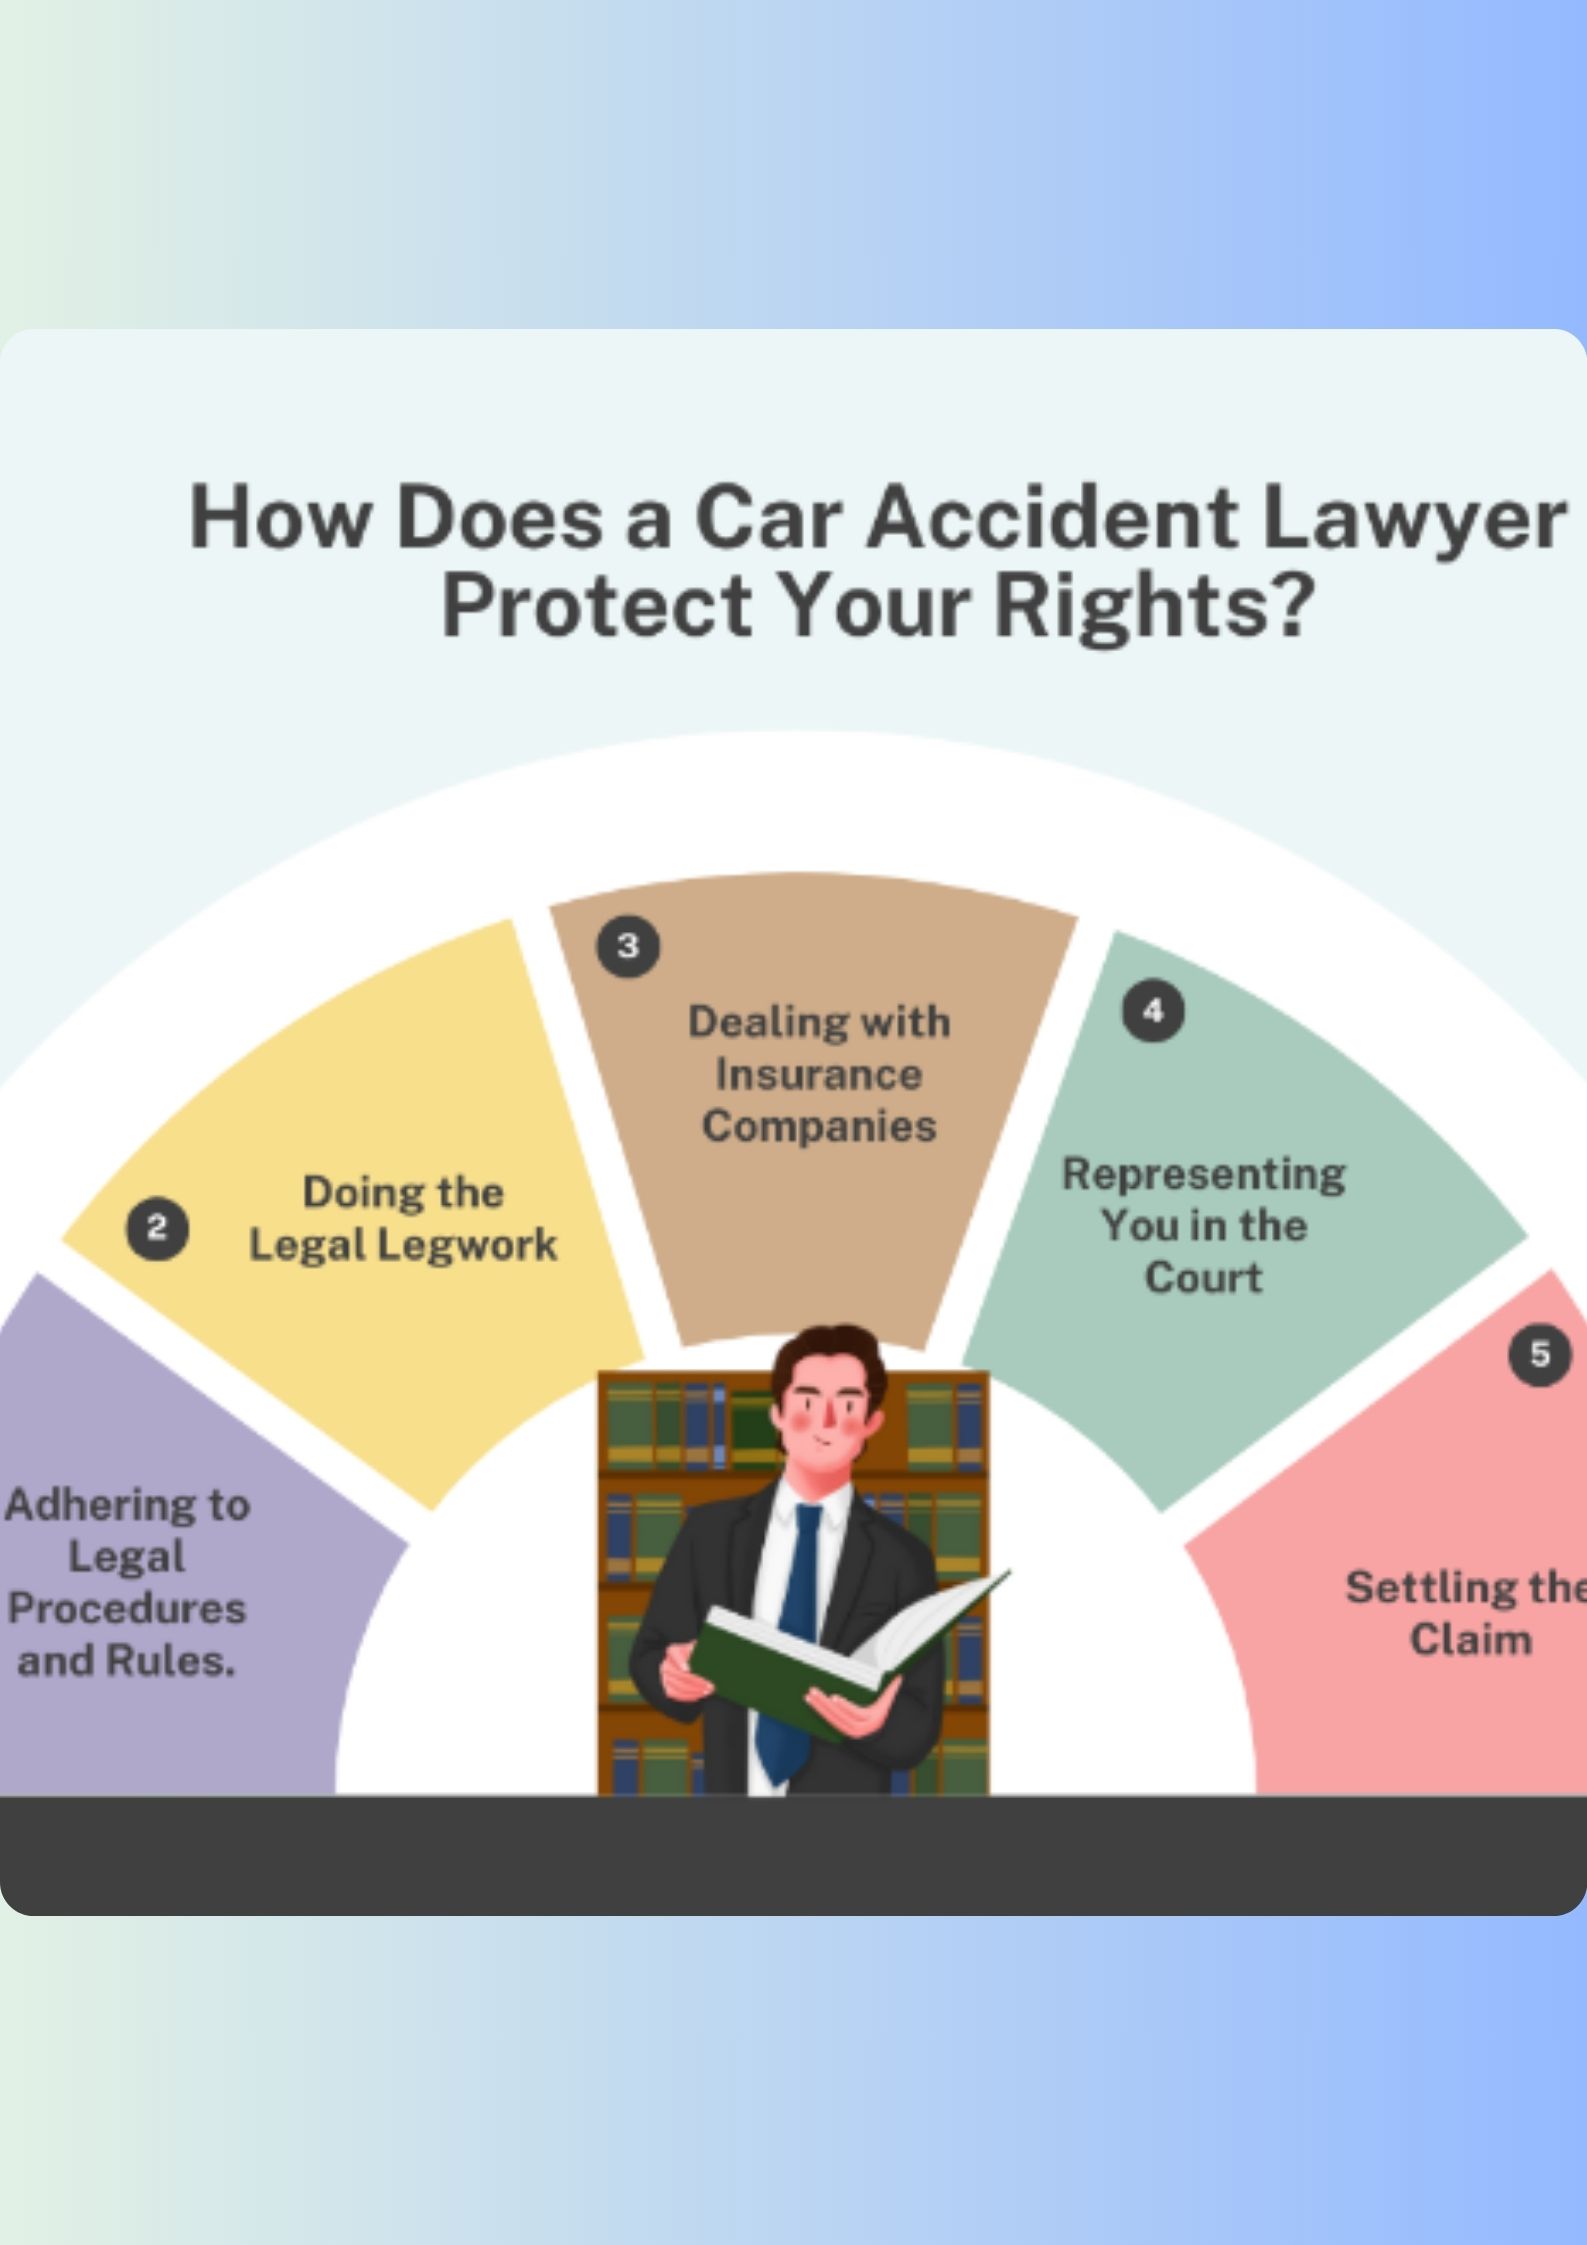 How Does a Car Accident Protect Your Right